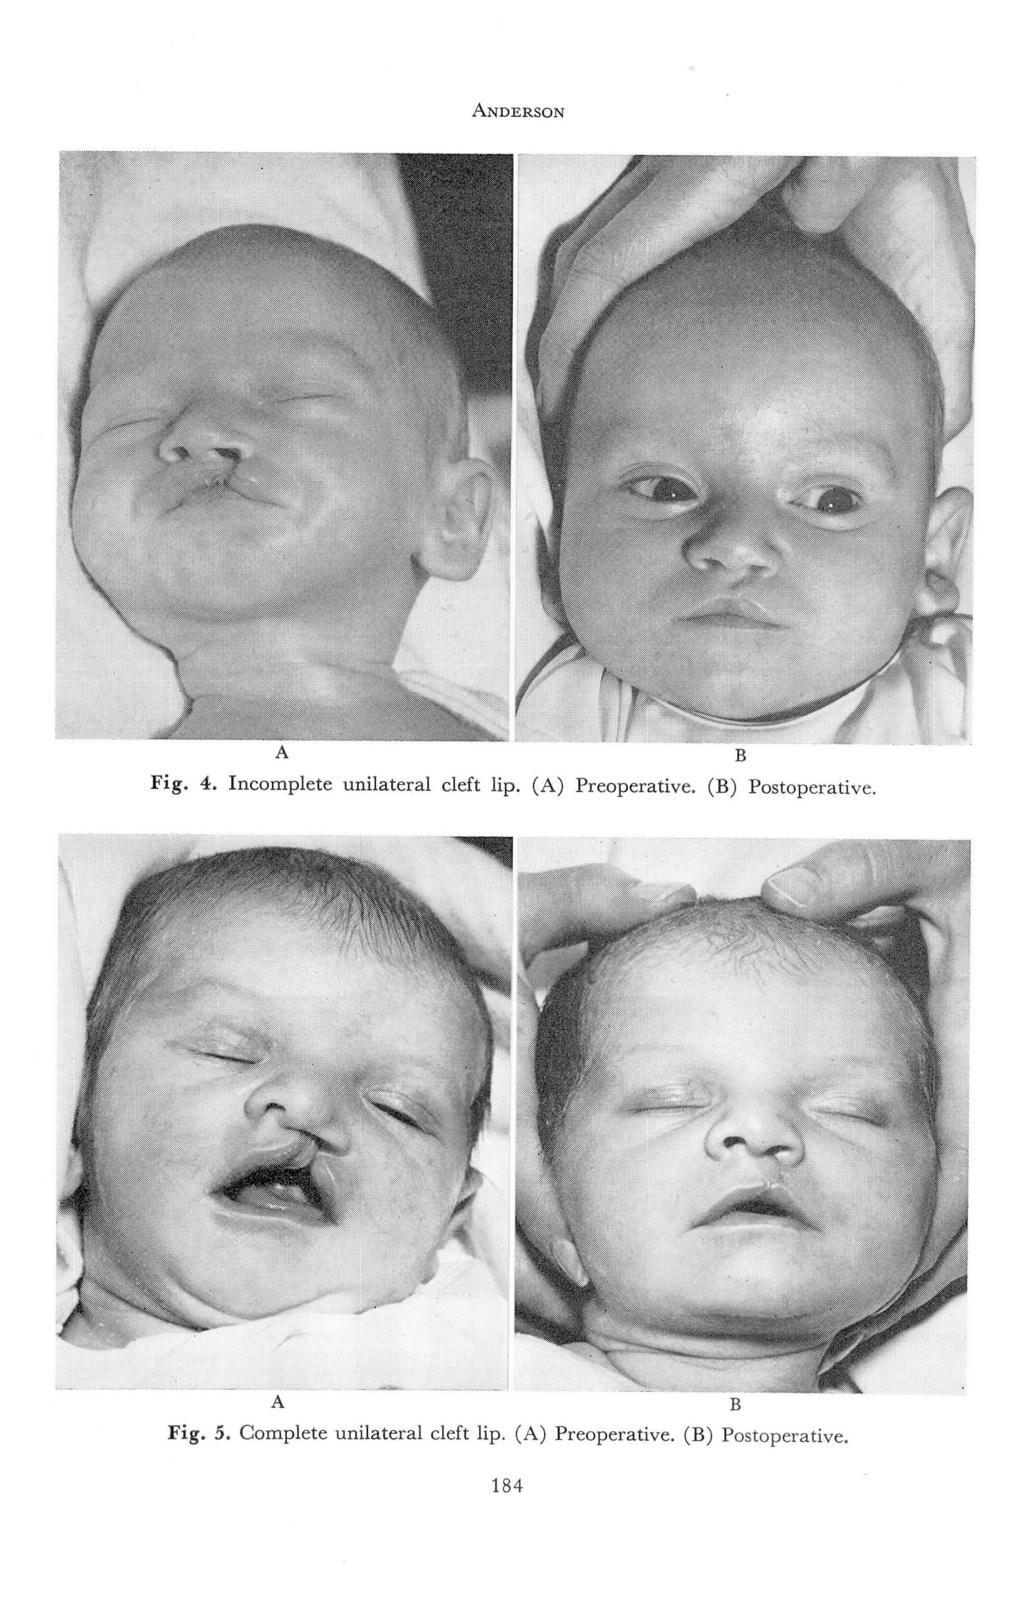 ANDERSON Fig. 4. Incomplete unilateral cleft lip. (A) Preoperative.